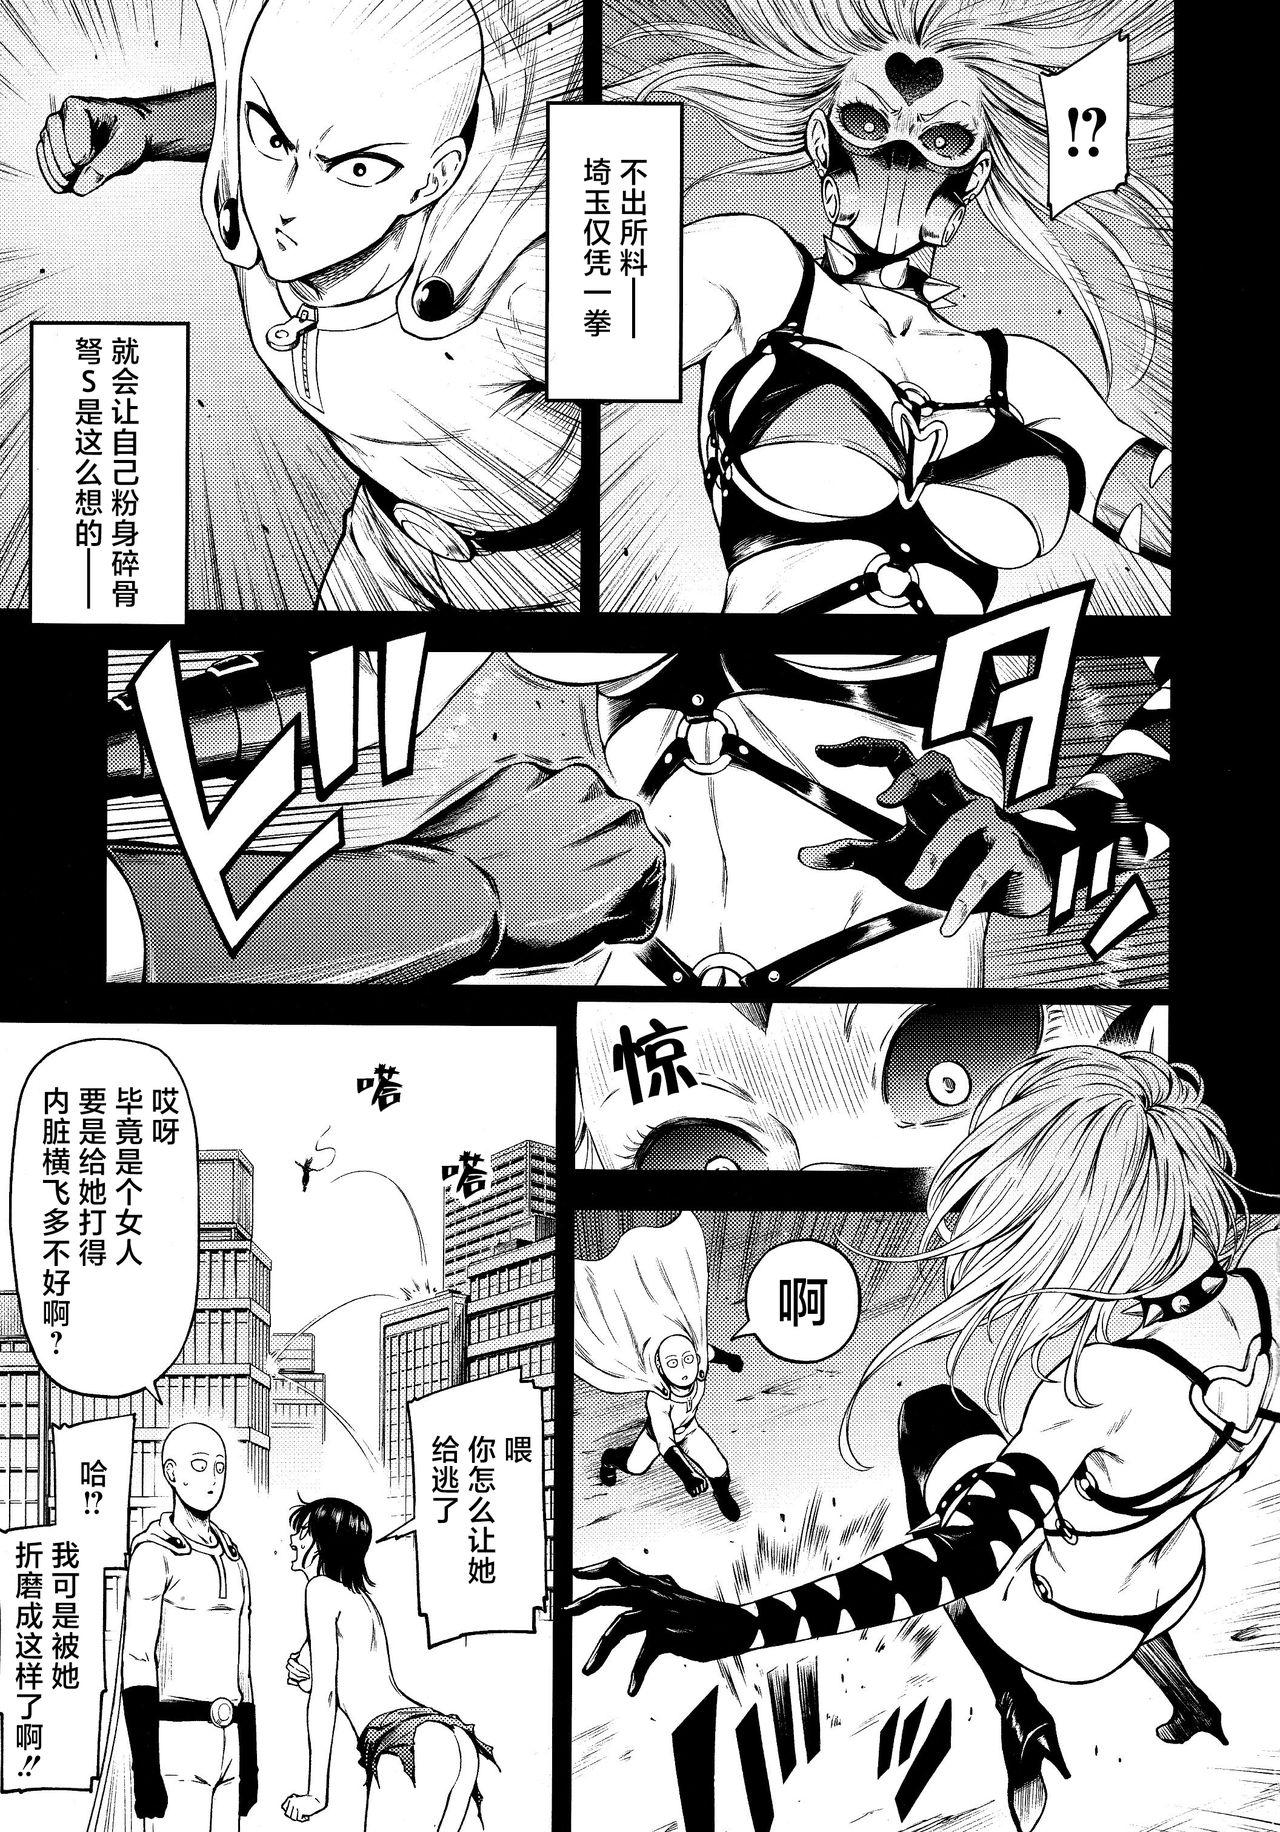 Nice Tits ONE-HURRICANE 8 - One punch man Fat Pussy - Page 2